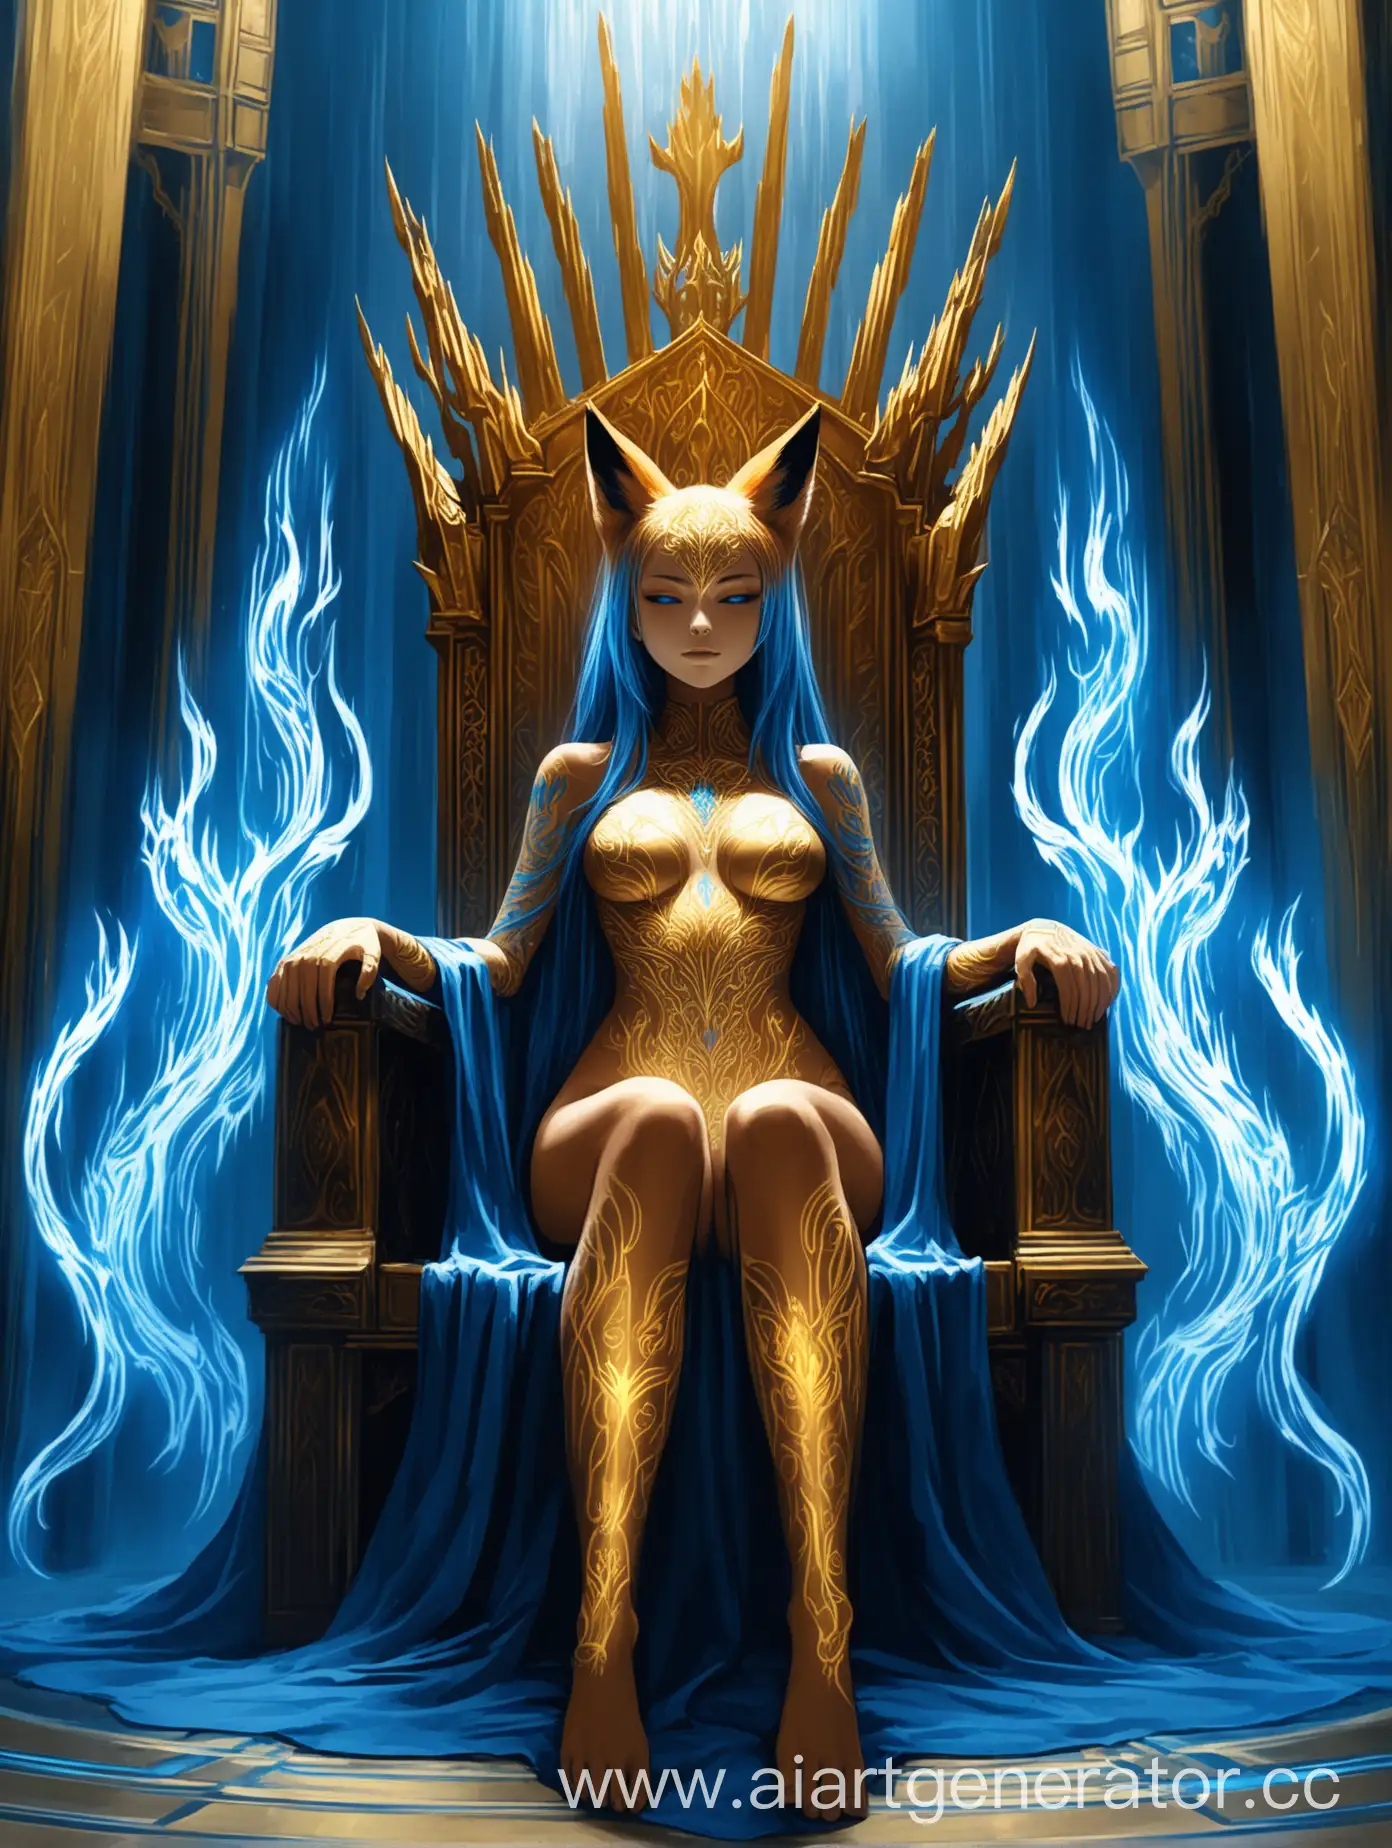 A fox in the image of a girl with golden tattoos on her body and an ambient blue aura in the throne room